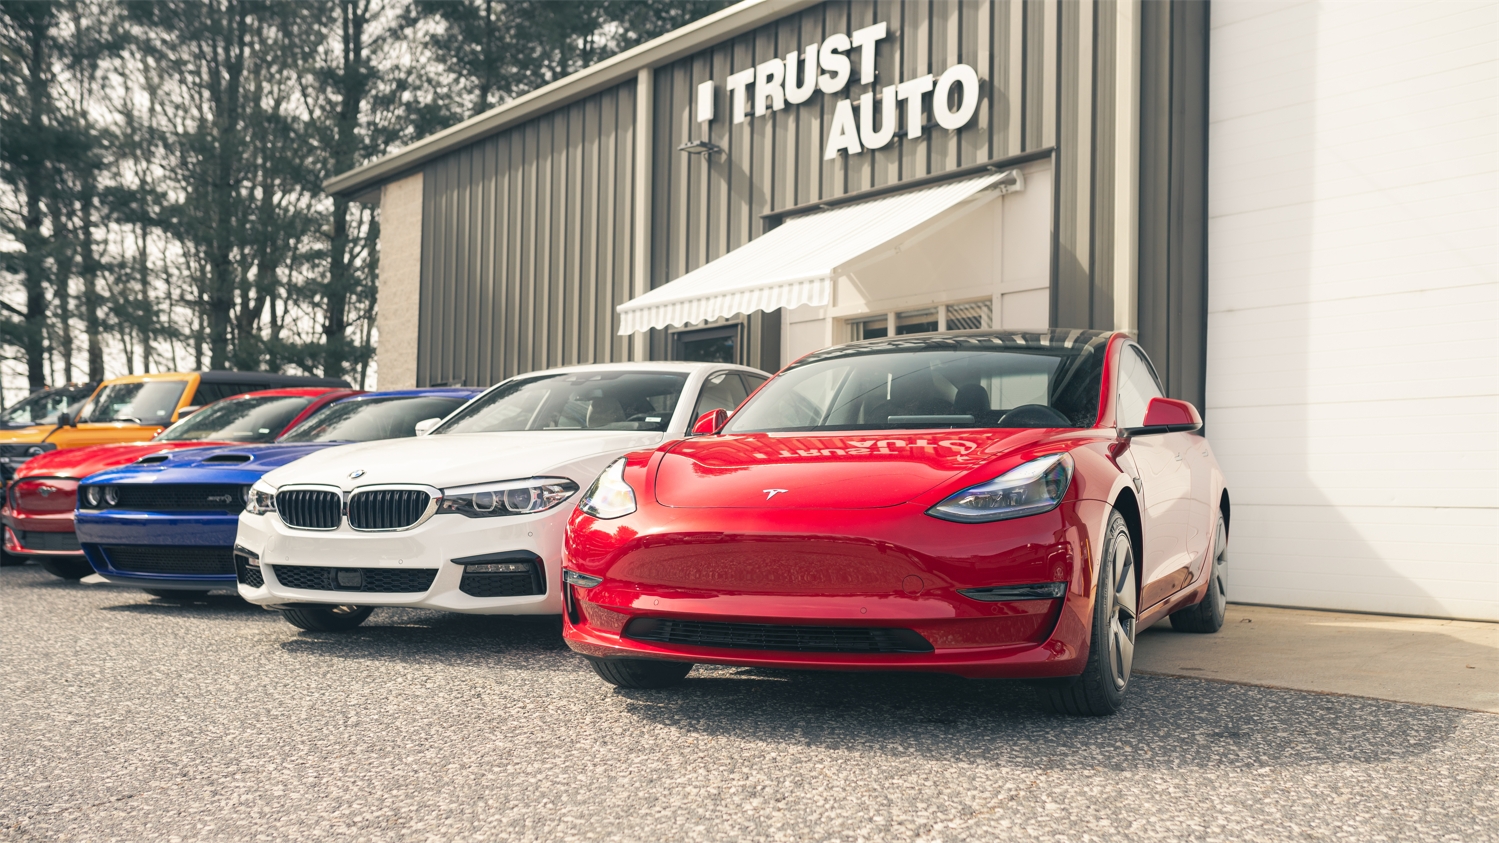 Trust_Auto_Front_Picture_of_the_dealership_50.jpg